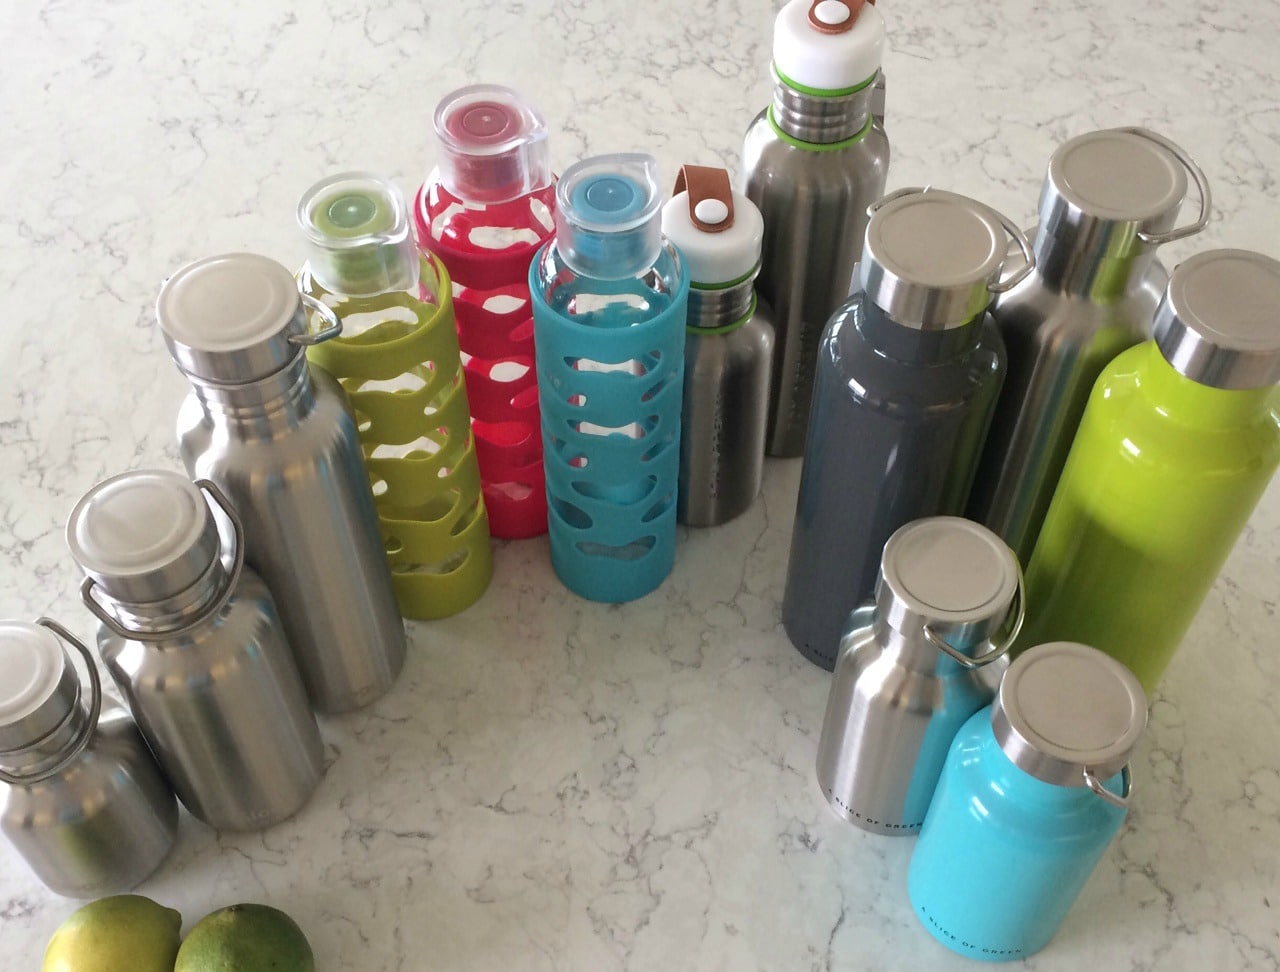 5 Reasons to Skip Plastic Water Bottles and Invest in a Reusable Bottle